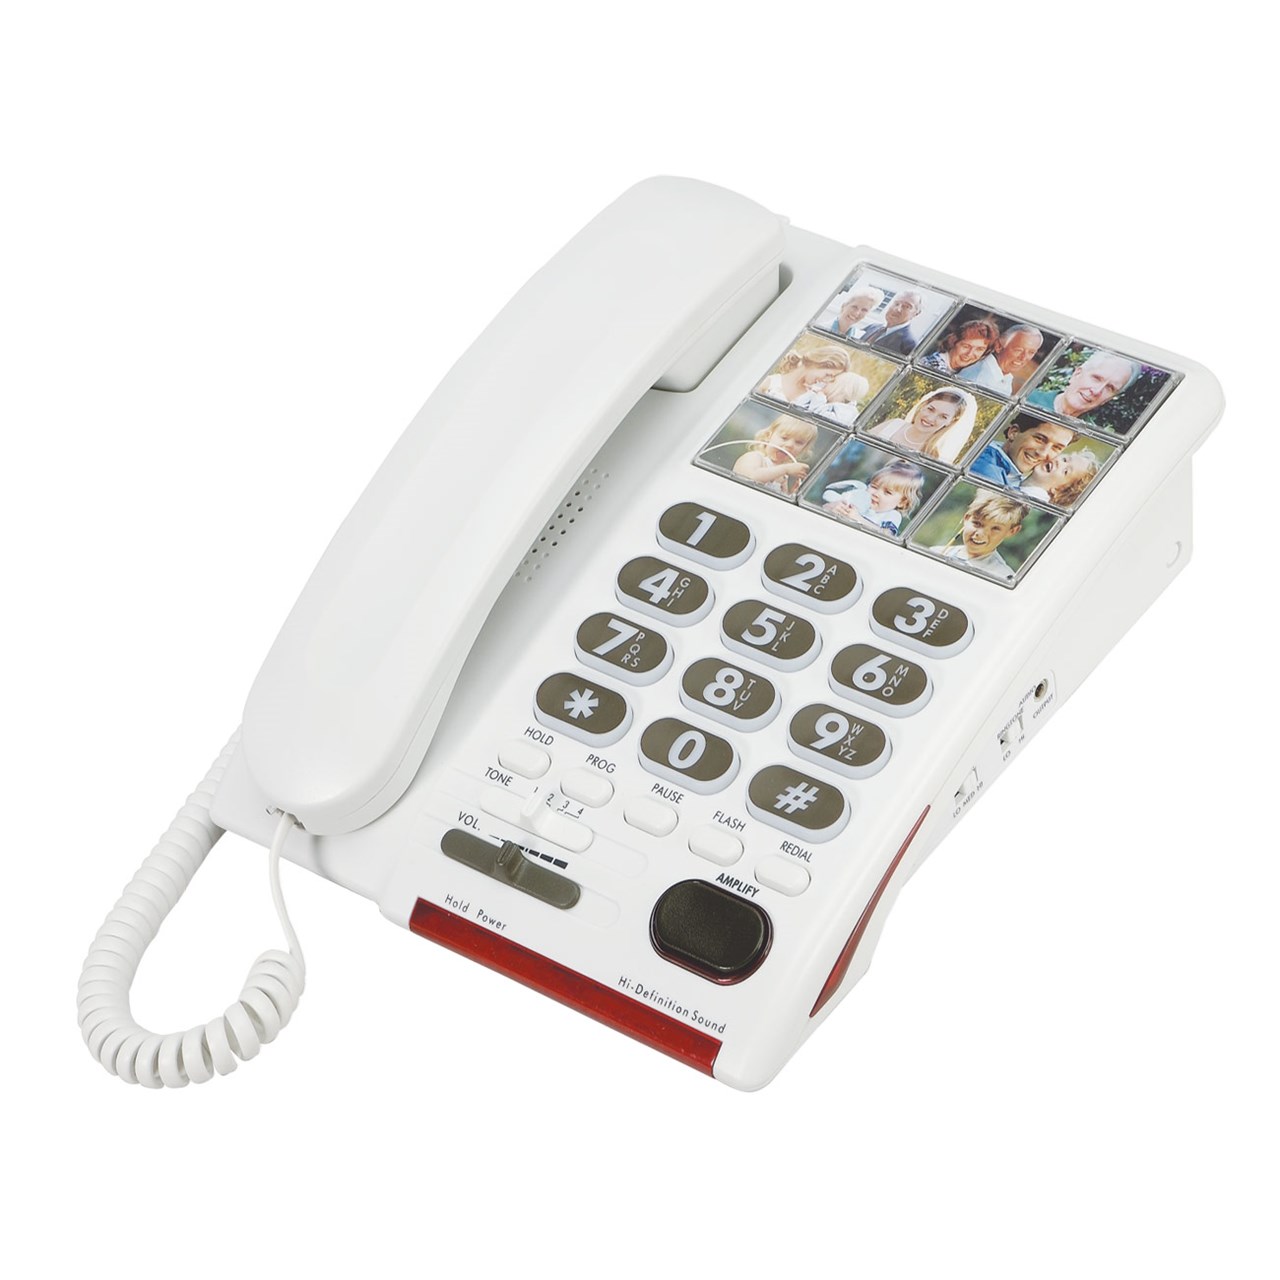 Serene 26dB Amplified Photo Dial Speakerphone for Hearing-Memory Loss - image 1 of 2